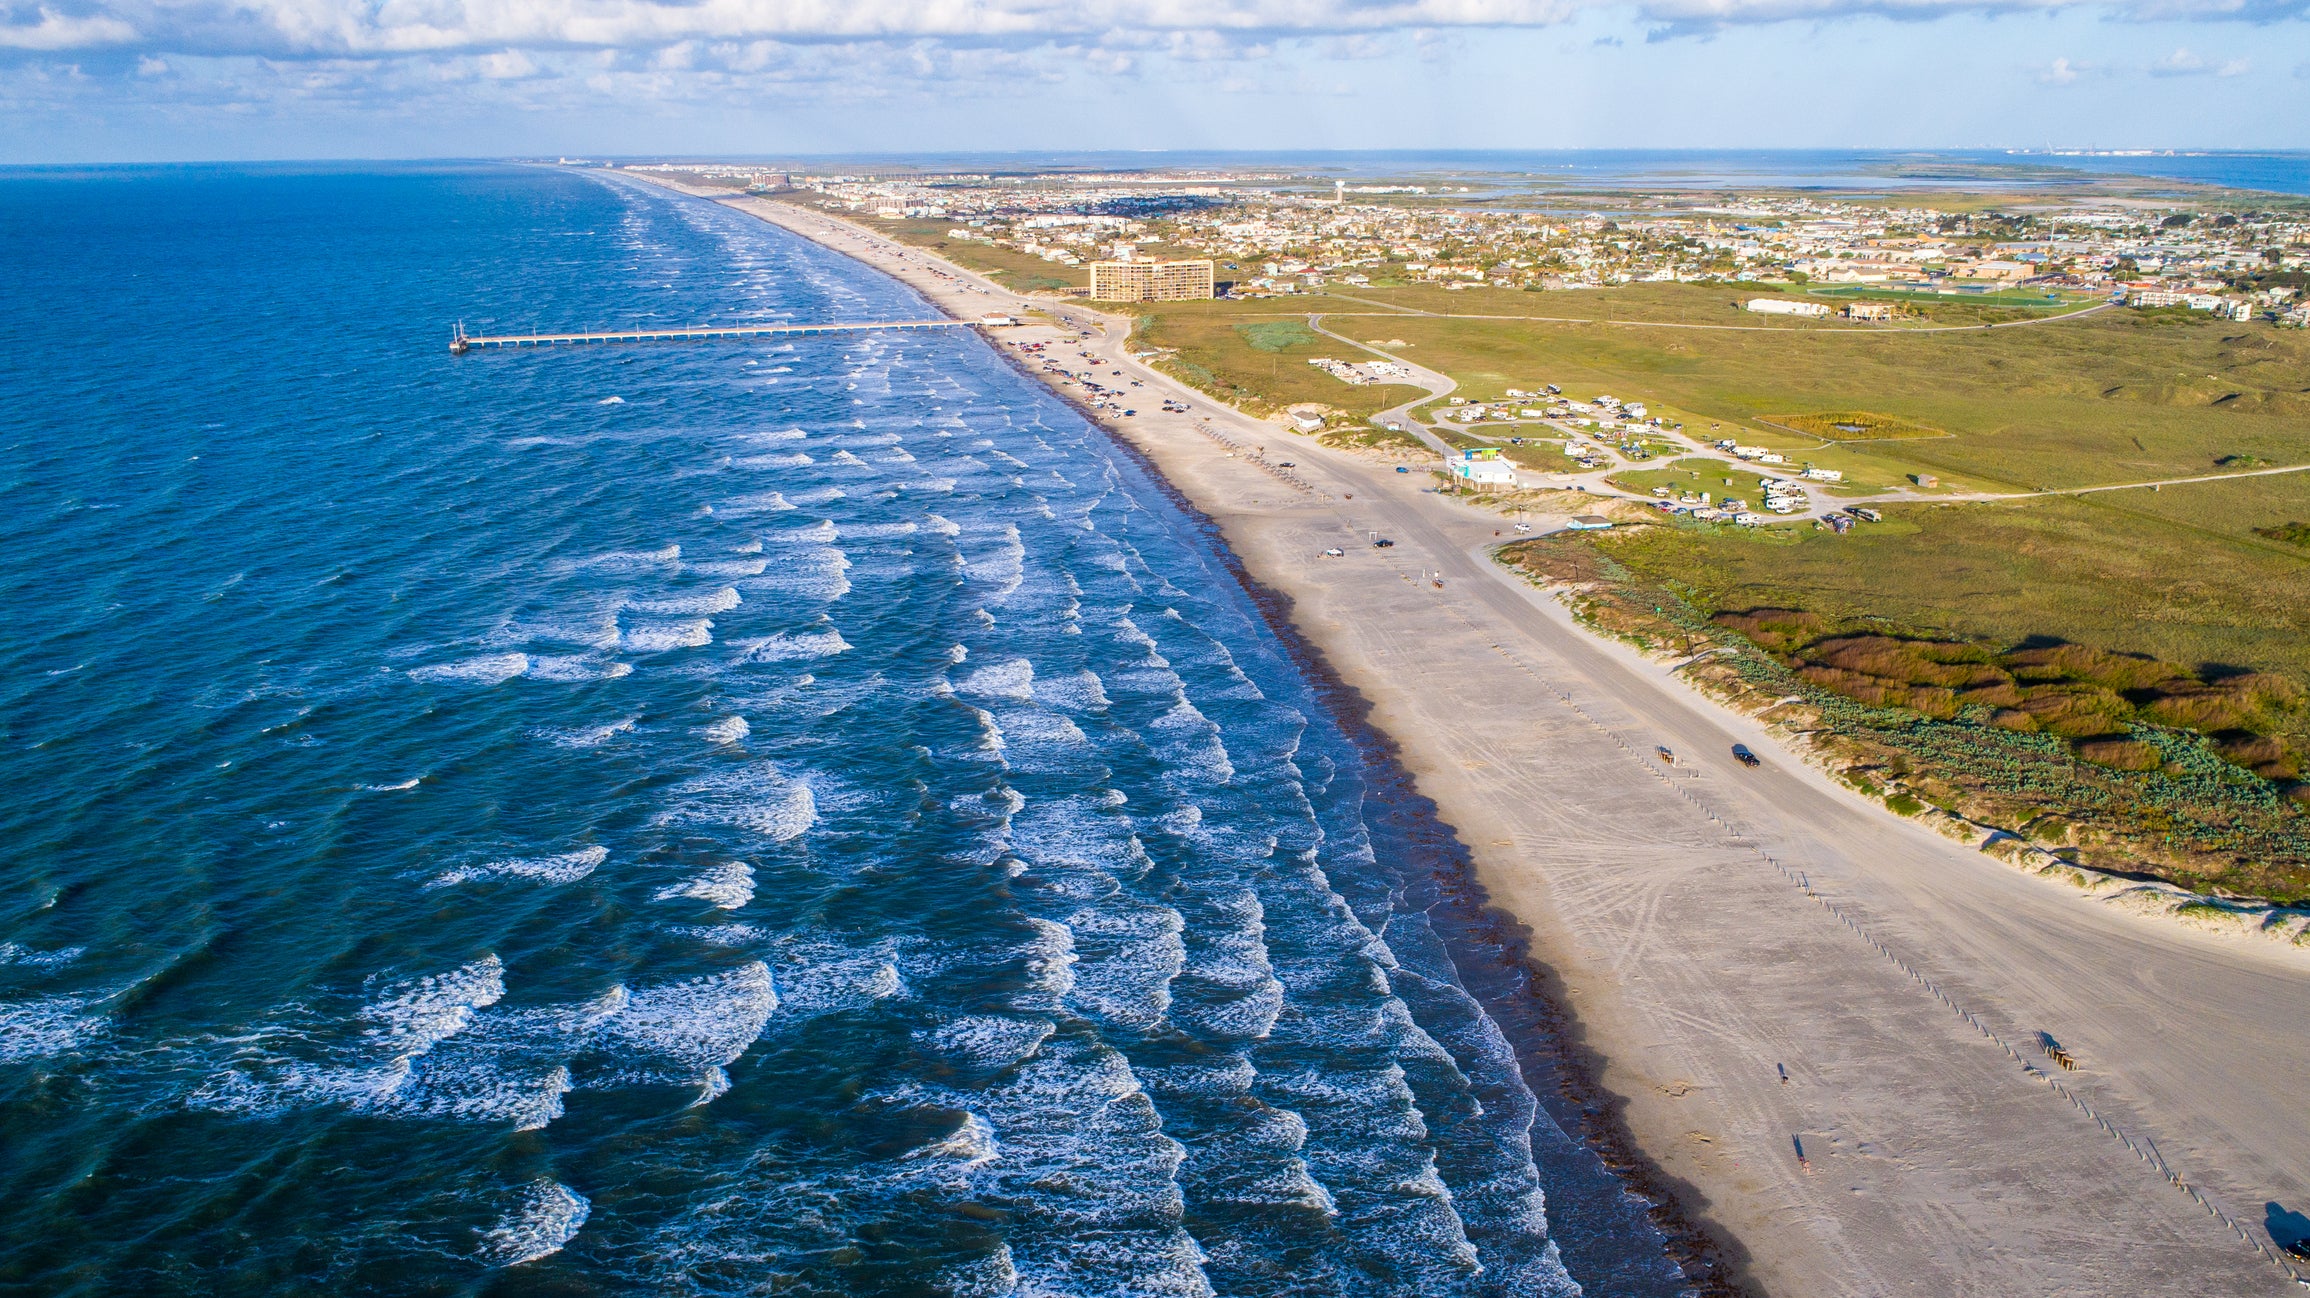 Padre Island is the world’s longest undeveloped barrier island